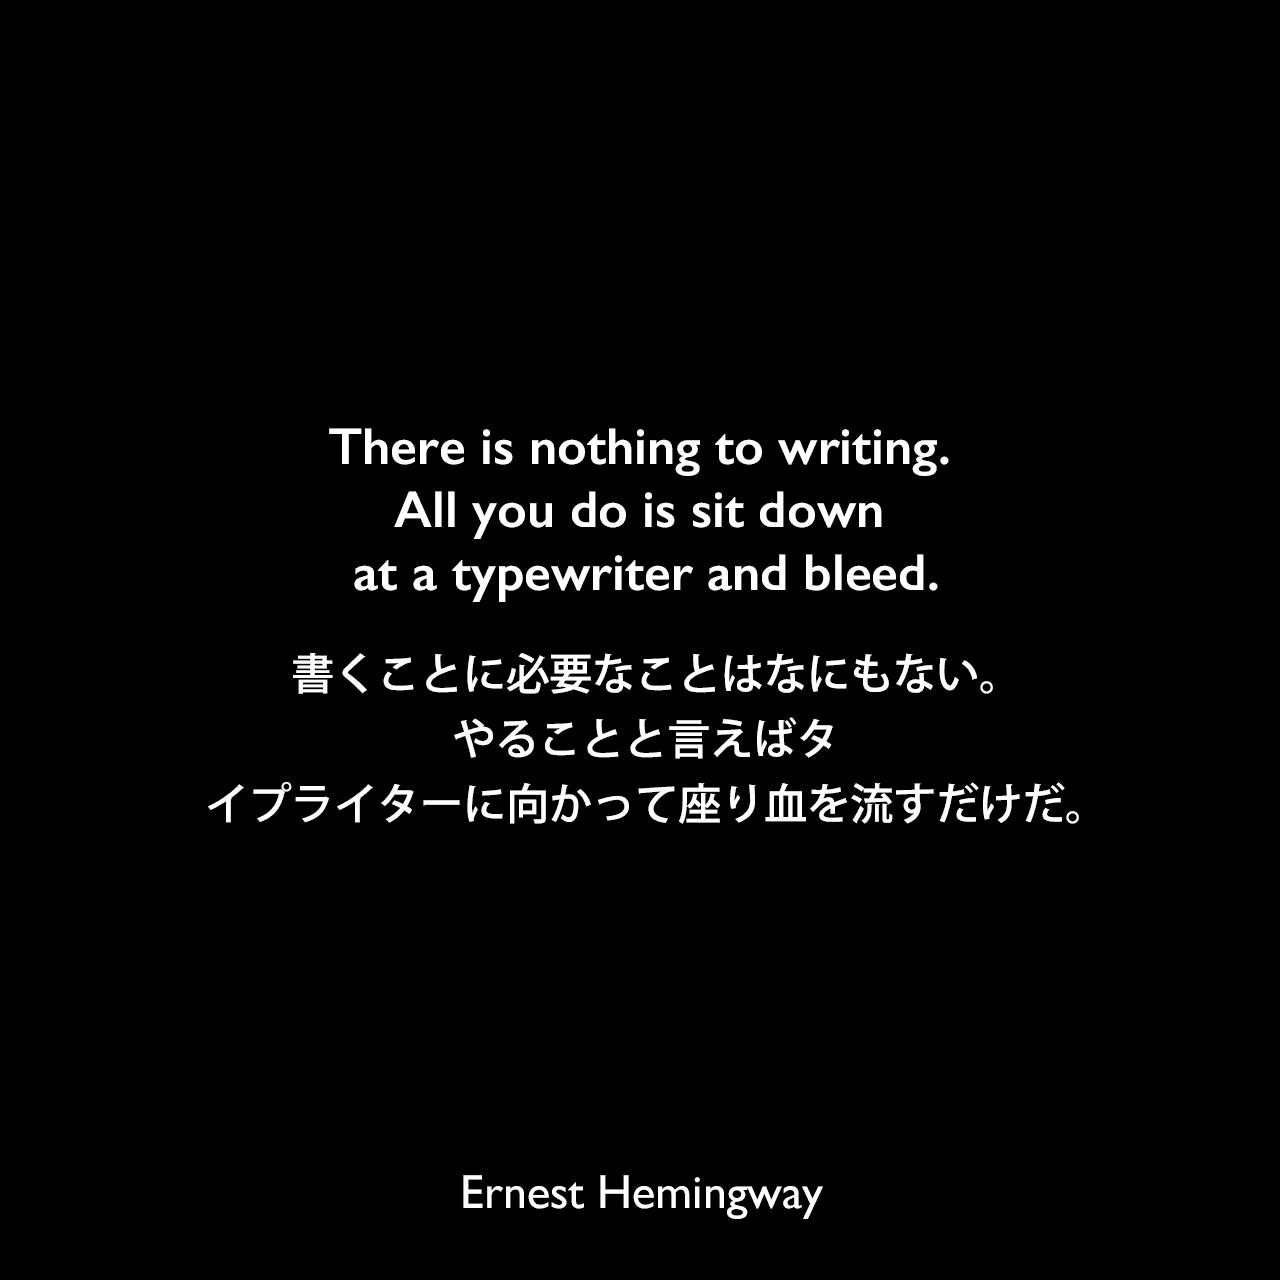 There is nothing to writing. All you do is sit down at a typewriter and bleed.書くことに必要なことはなにもない。やることと言えばタイプライターに向かって座り血を流すだけだ。Ernest Hemingway